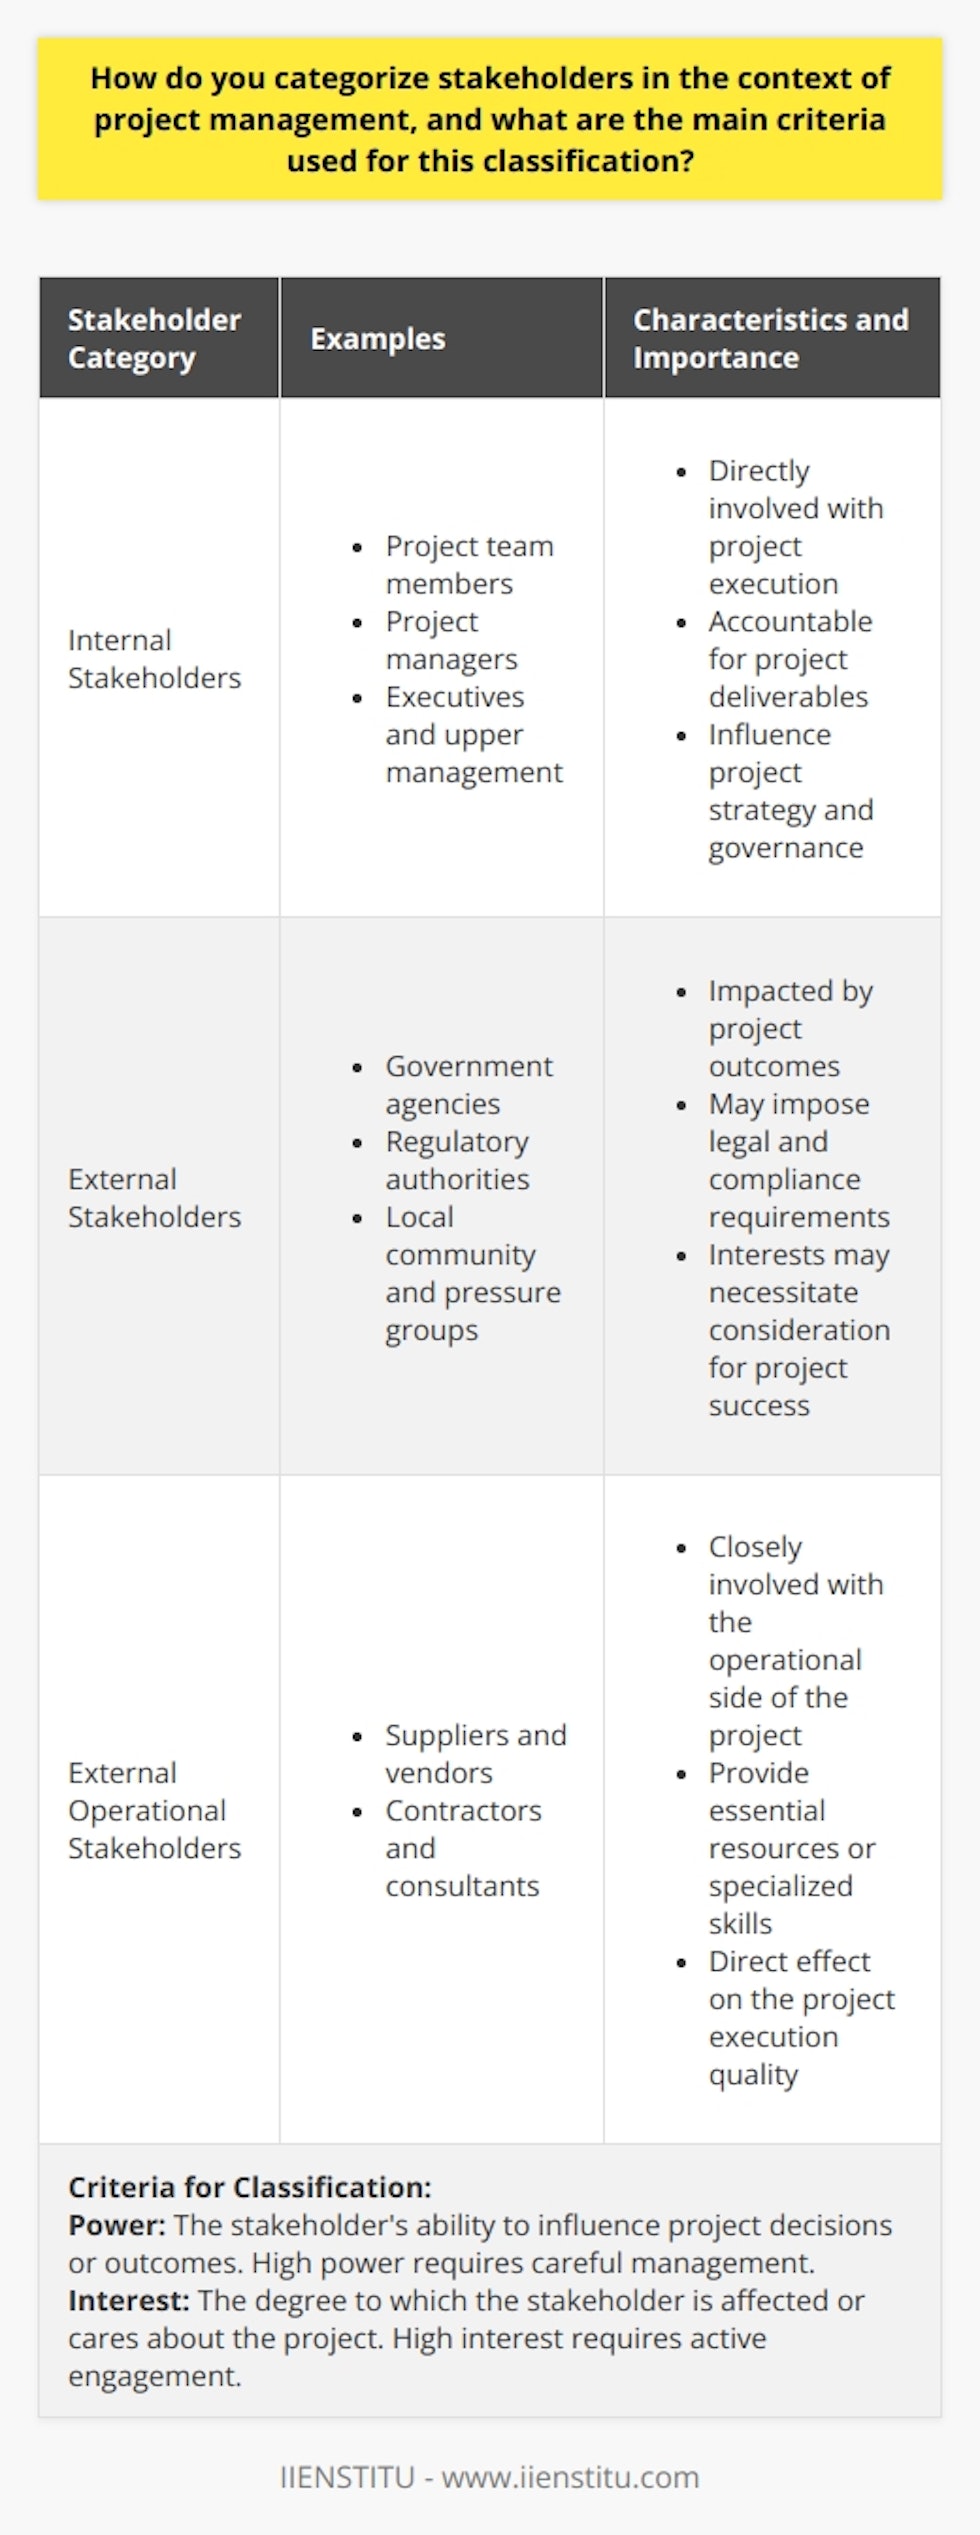 In the field of project management, effectively categorizing stakeholders is crucial for the outcome and smooth running of any project. Managing stakeholders involves understanding their various categories and aligning their needs and influences with the goals of the project. Stakeholders can be broadly classified into three main groups: internal, external, and external operational.**Internal Stakeholders:**The first group, internal stakeholders, consists of individuals and groups that are part of the organization undertaking the project. These stakeholders are directly affected by the project's success, as their work and the organization's well-being are intertwined. Key participants in this group typically include:- Project team members, who carry out the day-to-day tasks and are directly accountable for project deliverables.- Project managers, who oversee the project as a whole, ensuring that it meets its objectives and is completed on time and within budget.- Executives and upper management, who are responsible for making strategic decisions, securing project resources, and supporting project governance. **External Stakeholders:**The second category, external stakeholders, is not involved in the daily workings of the project but may be impacted by or have an influence over the project outcomes. This category often spans a wide range of entities:- Government agencies and regulatory authorities, which may impose legal and compliance requirements that the project must adhere to.- The local community and pressure groups, whose interests or concerns may need to be addressed, especially if the project affects their environment or daily lives.**External Operational Stakeholders:**The third group, external operational stakeholders, although not part of the organization, are closely involved in the project's execution. Their role is more hands-on, compared to other external stakeholders. This category includes:- Suppliers and vendors, who provide the necessary materials, products, or services essential for the project.- Contractors and consultants, who contribute specialized expertise or carry out certain aspects of the project on behalf of the organization.**Criteria for Stakeholder Classification:**When categorizing stakeholders, two key criteria are generally used: power and interest.1. **Power**: This refers to the stakeholder's ability to influence project decisions or outcomes. Stakeholders with high power can have a significant effect on the project's direction, necessitating careful management and frequent communication to ensure their needs are aligned with project objectives.2. **Interest**: This speaks to the extent to which stakeholders are affected by the project or care about its success. Stakeholders with high interest are more likely to be actively involved and can become strong advocates or opponents of the project, based on how their interests are addressed.By analyzing stakeholders through the lens of power and interest, project managers can prioritize their engagement strategies, tailor their communication plans, and understand where to allocate their attention and resources. Properly classifying stakeholders not only helps manage them effectively but also aligns their expectations with the goals of the project. It ensures that the project's progress is not hindered by overlooked needs or tensions and that outcomes are beneficial to all concerned parties.